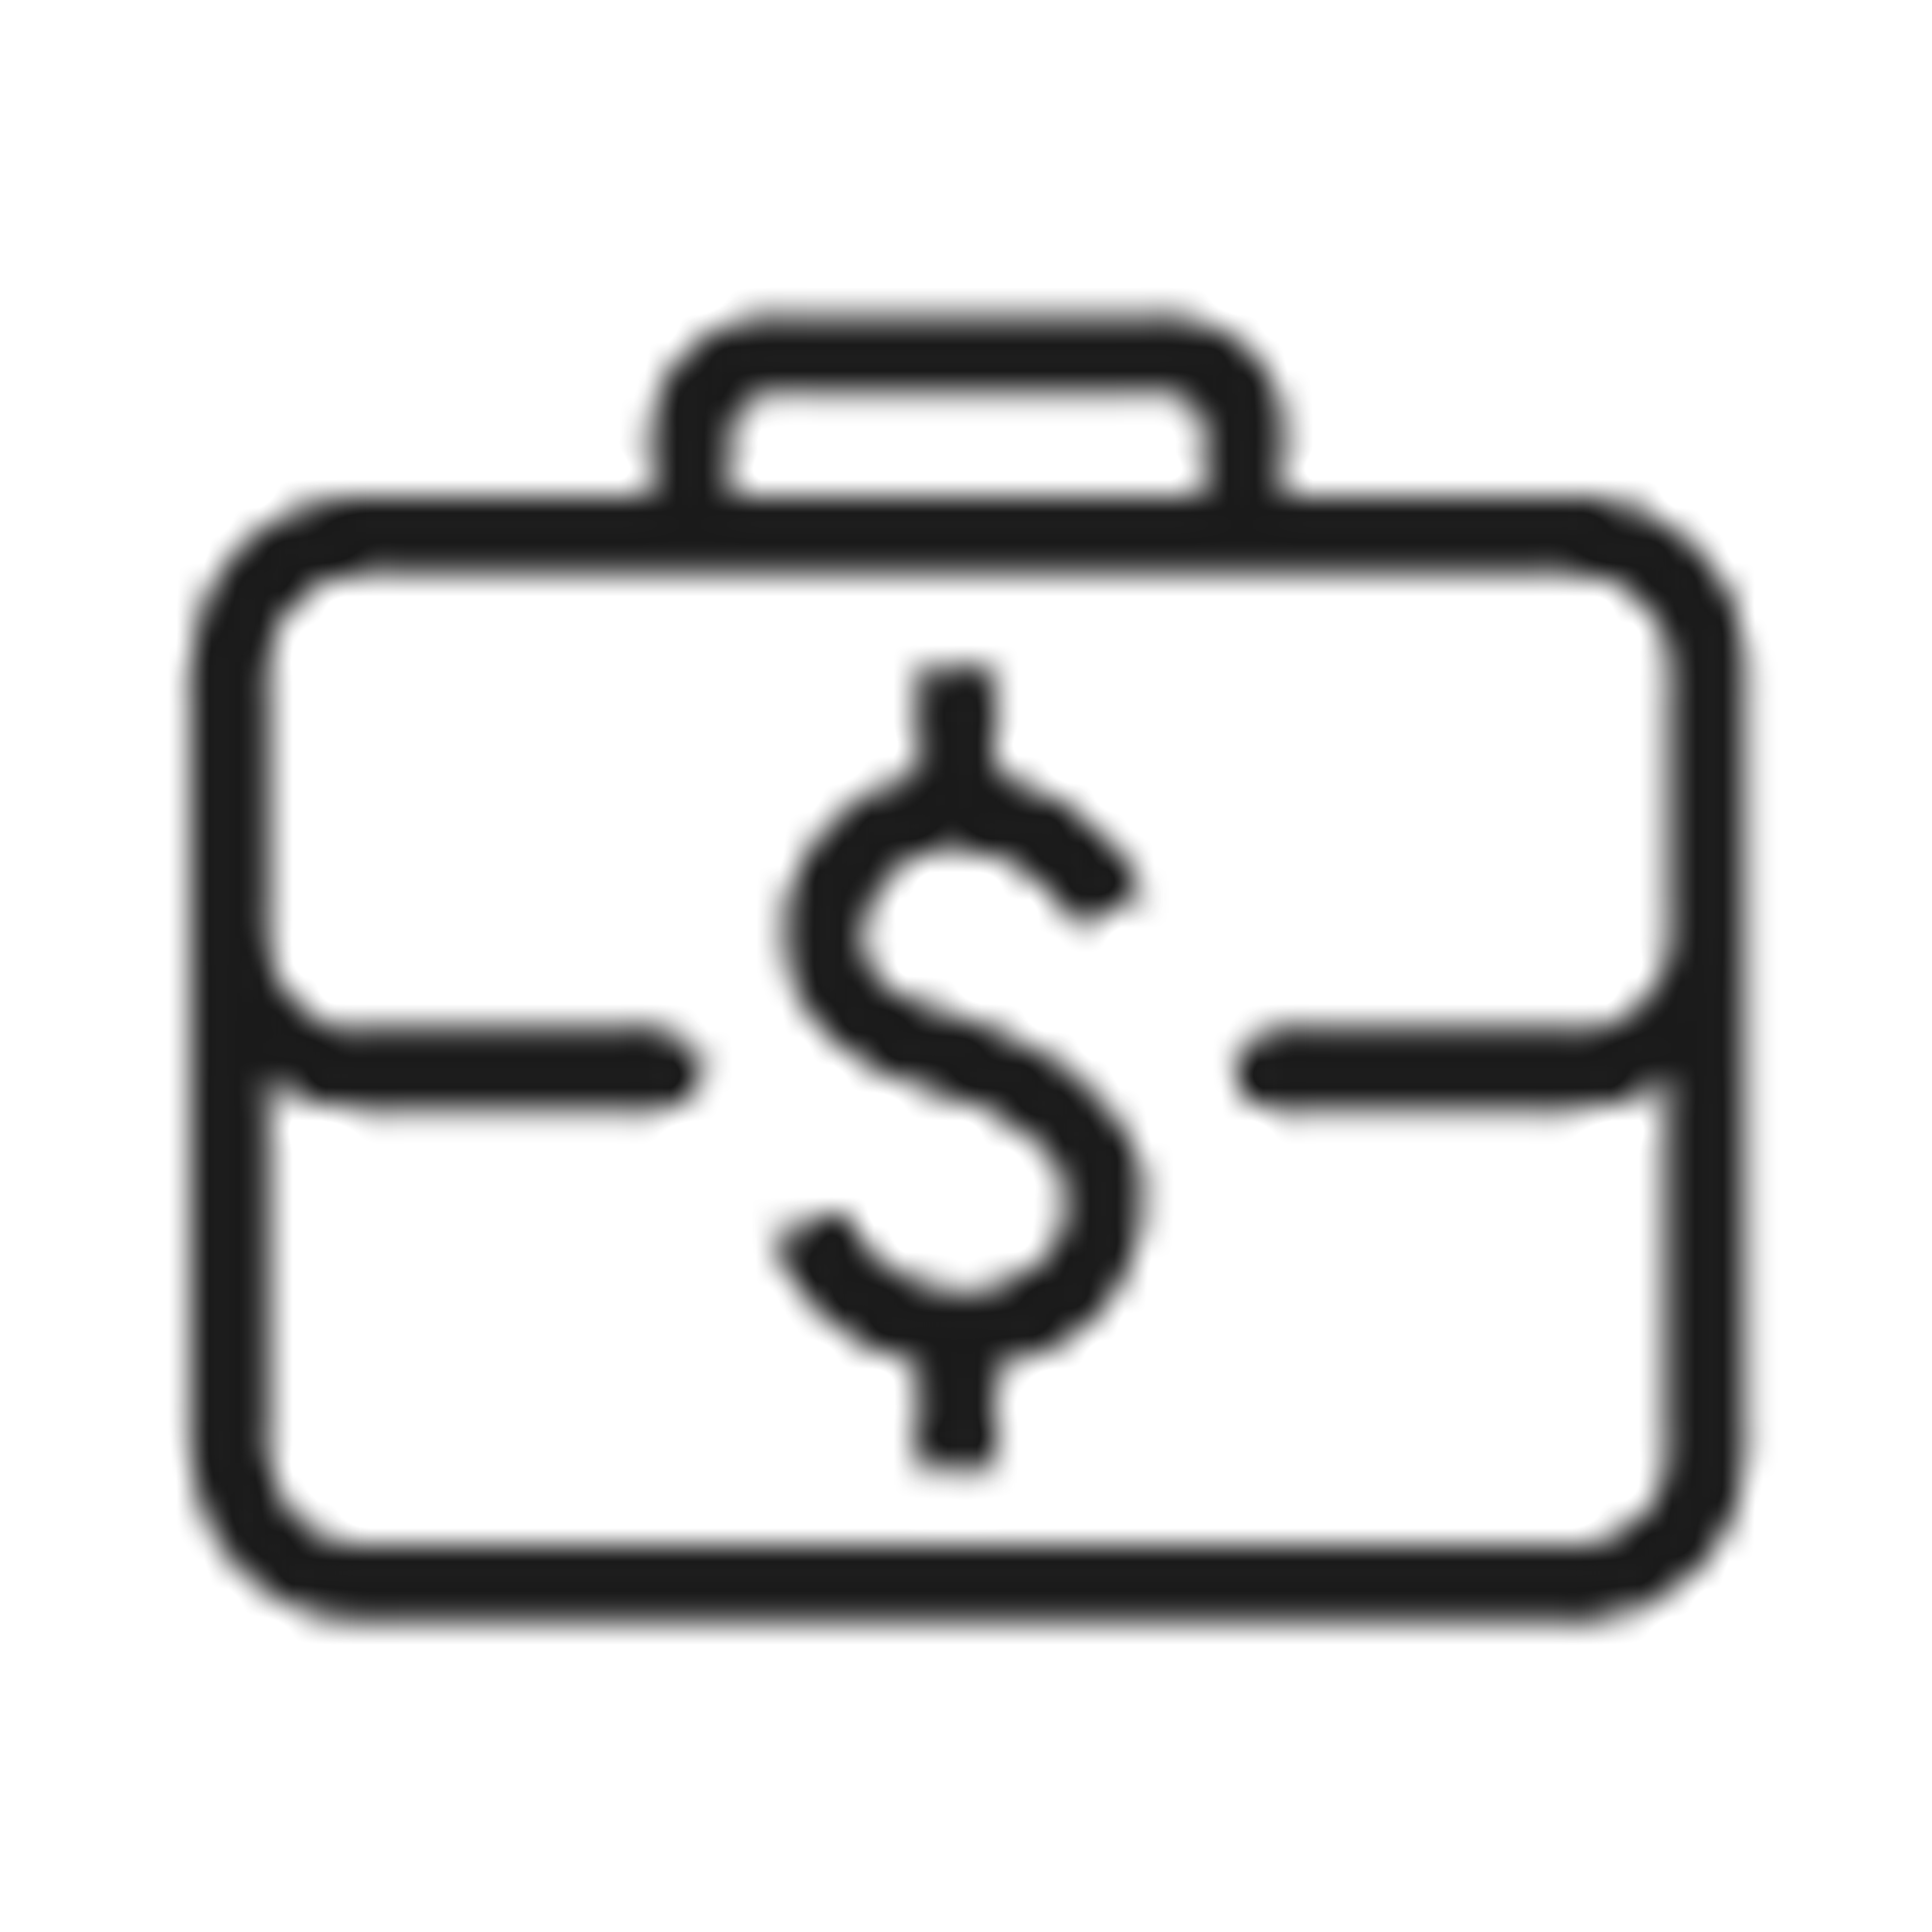 Stylized briefcase with dollar sign in middle